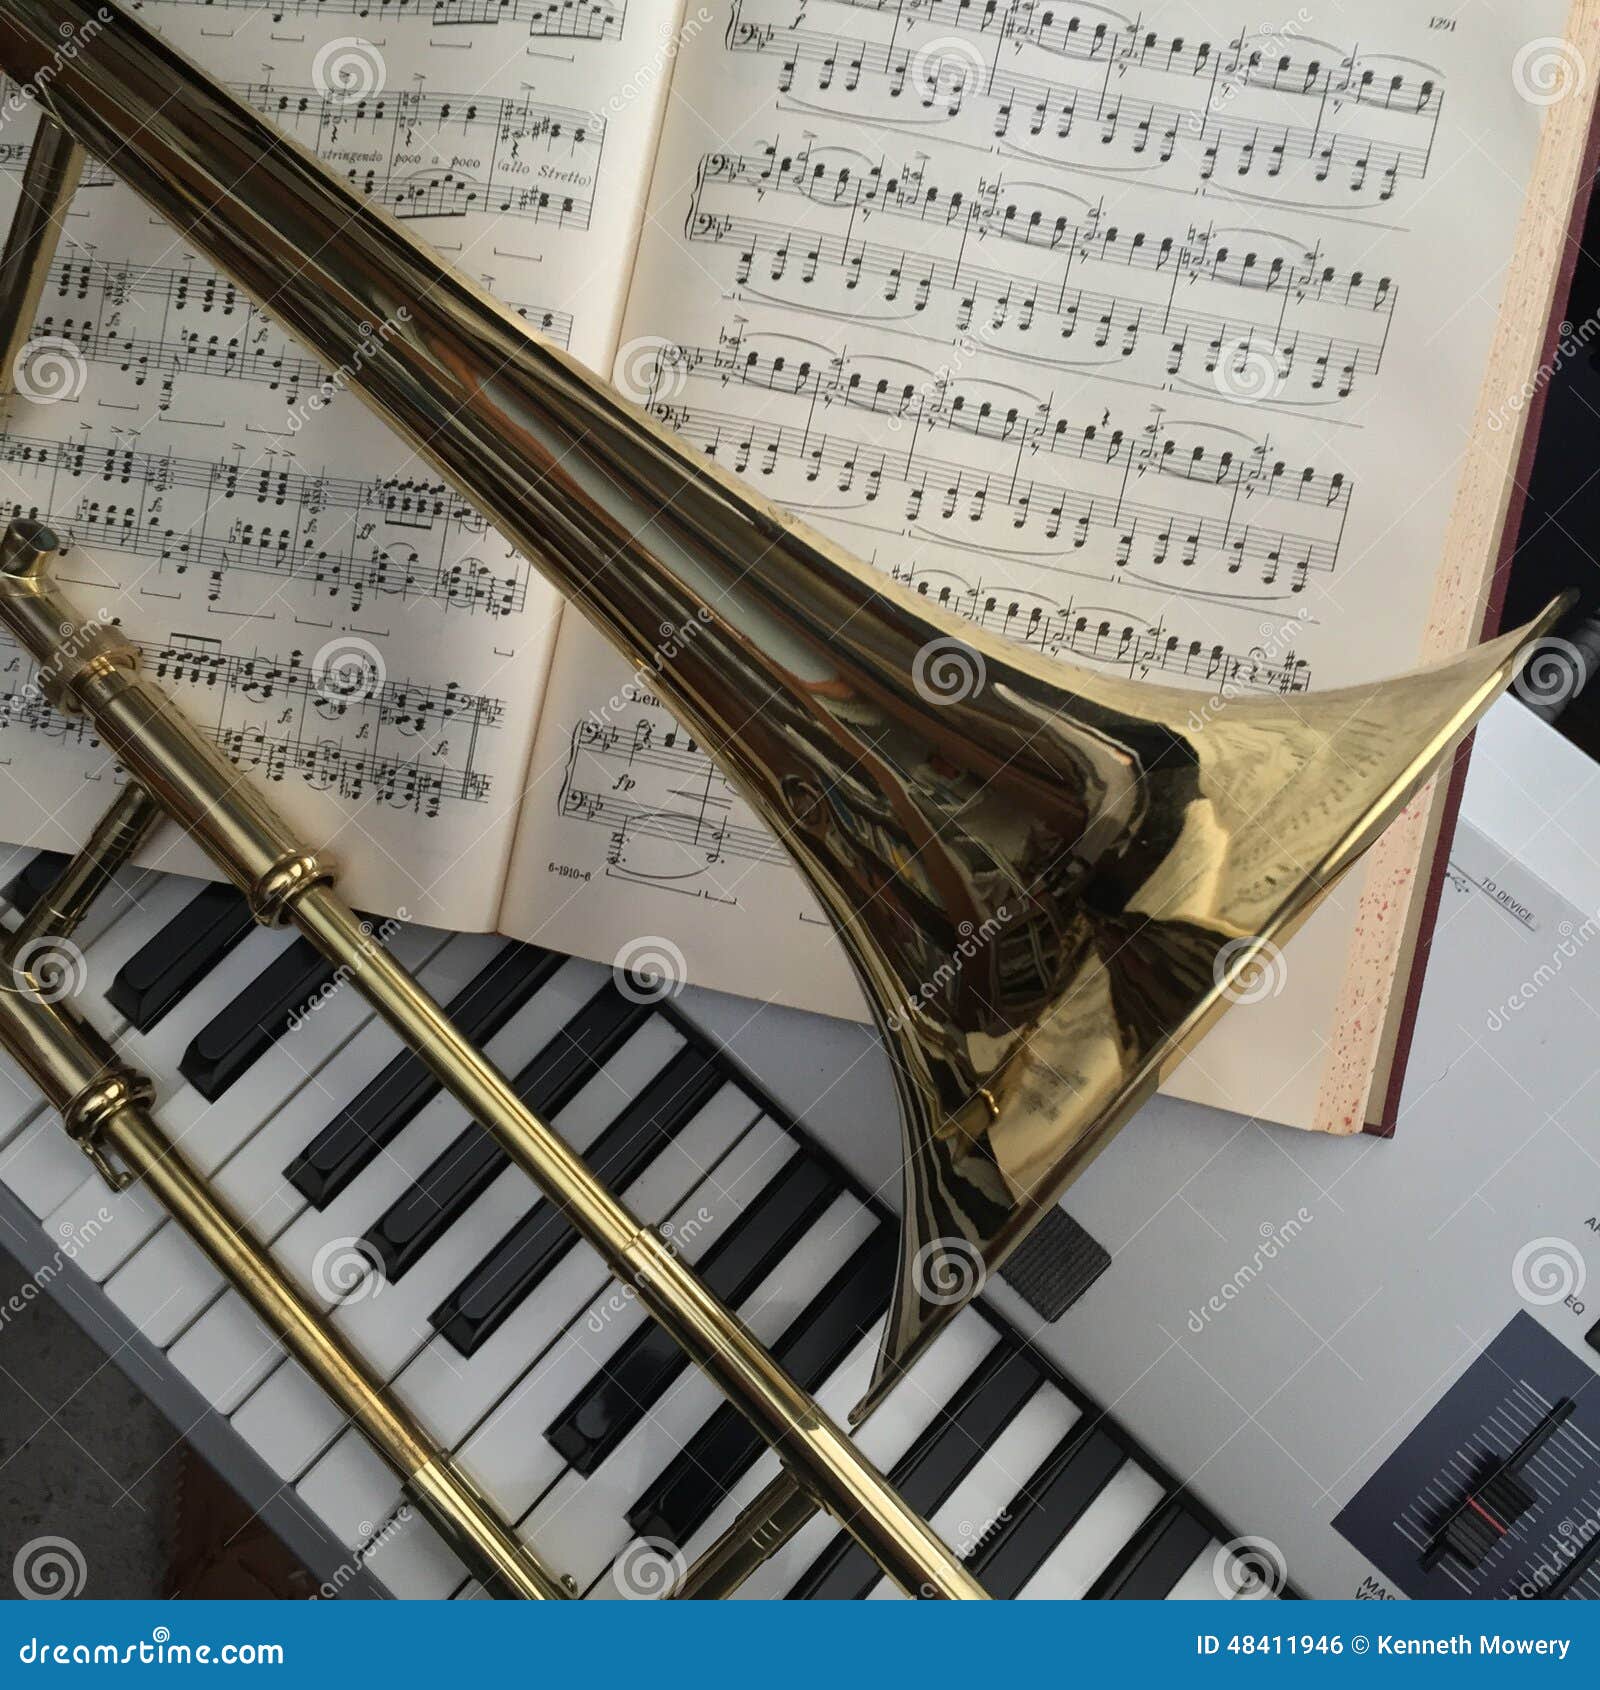 brass trombone and synthesizer keyboard and classical music